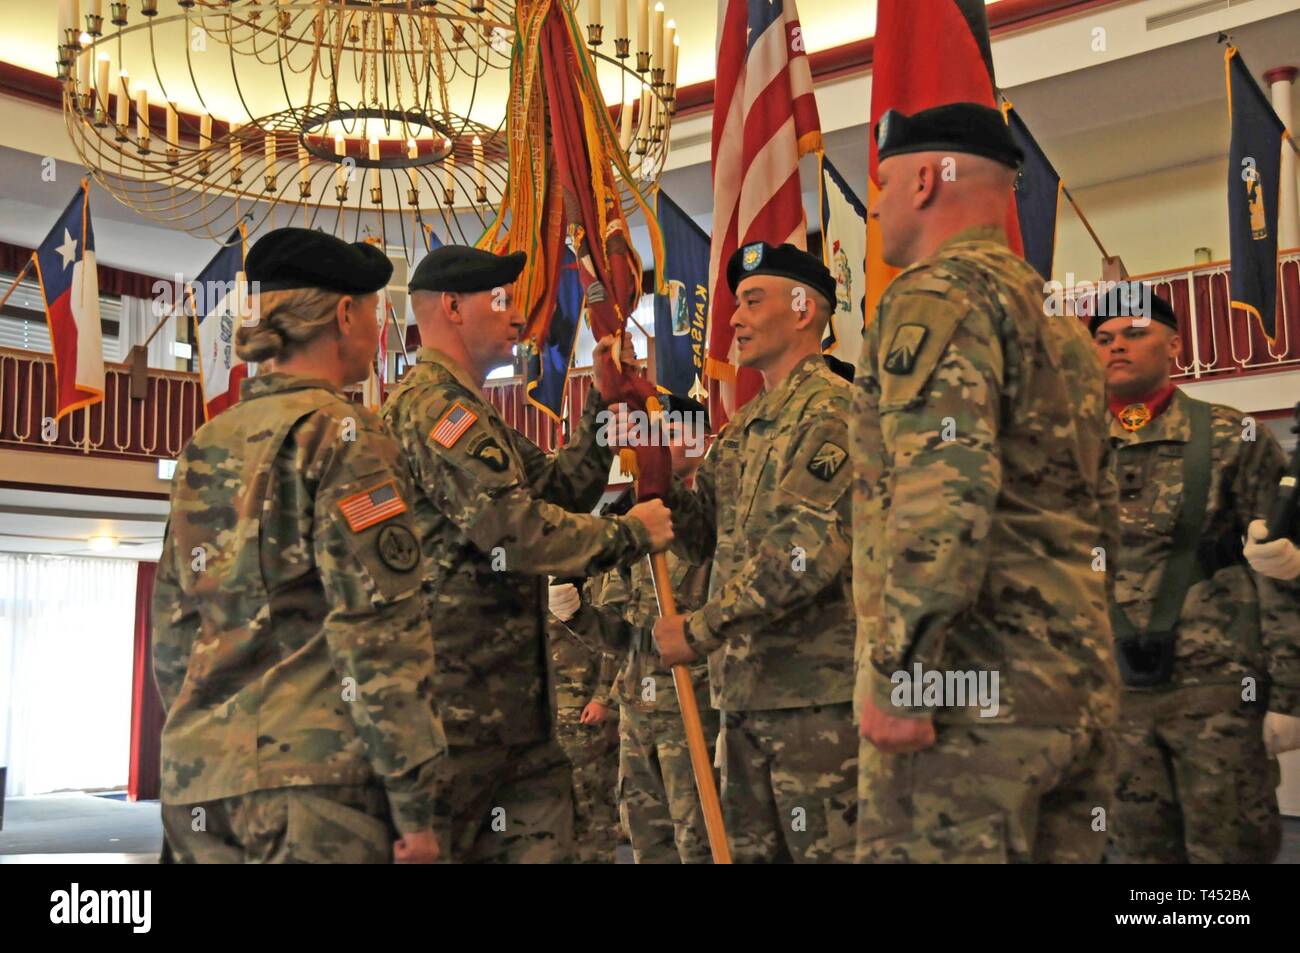 Lt. Col. Brandon H. Ungetheim, 39th Transportation Battalion (Movement Control), 16th Sustainment Brigade, incoming battalion commander (left), passes the unit colors to Command Sgt. Maj. Michael D. Russell, senior enlisted advisor, 39th Trans. Bn., during a Change of Command ceremony at the Armstrong Club, Kaiserslautern, Germany, Feb. 26, 2019. During the ceremony, Lt. Col. William R. Kost, outgoing battalion commander, formally passed accountability, authority and command of the battalion to Ungetheim. Stock Photo